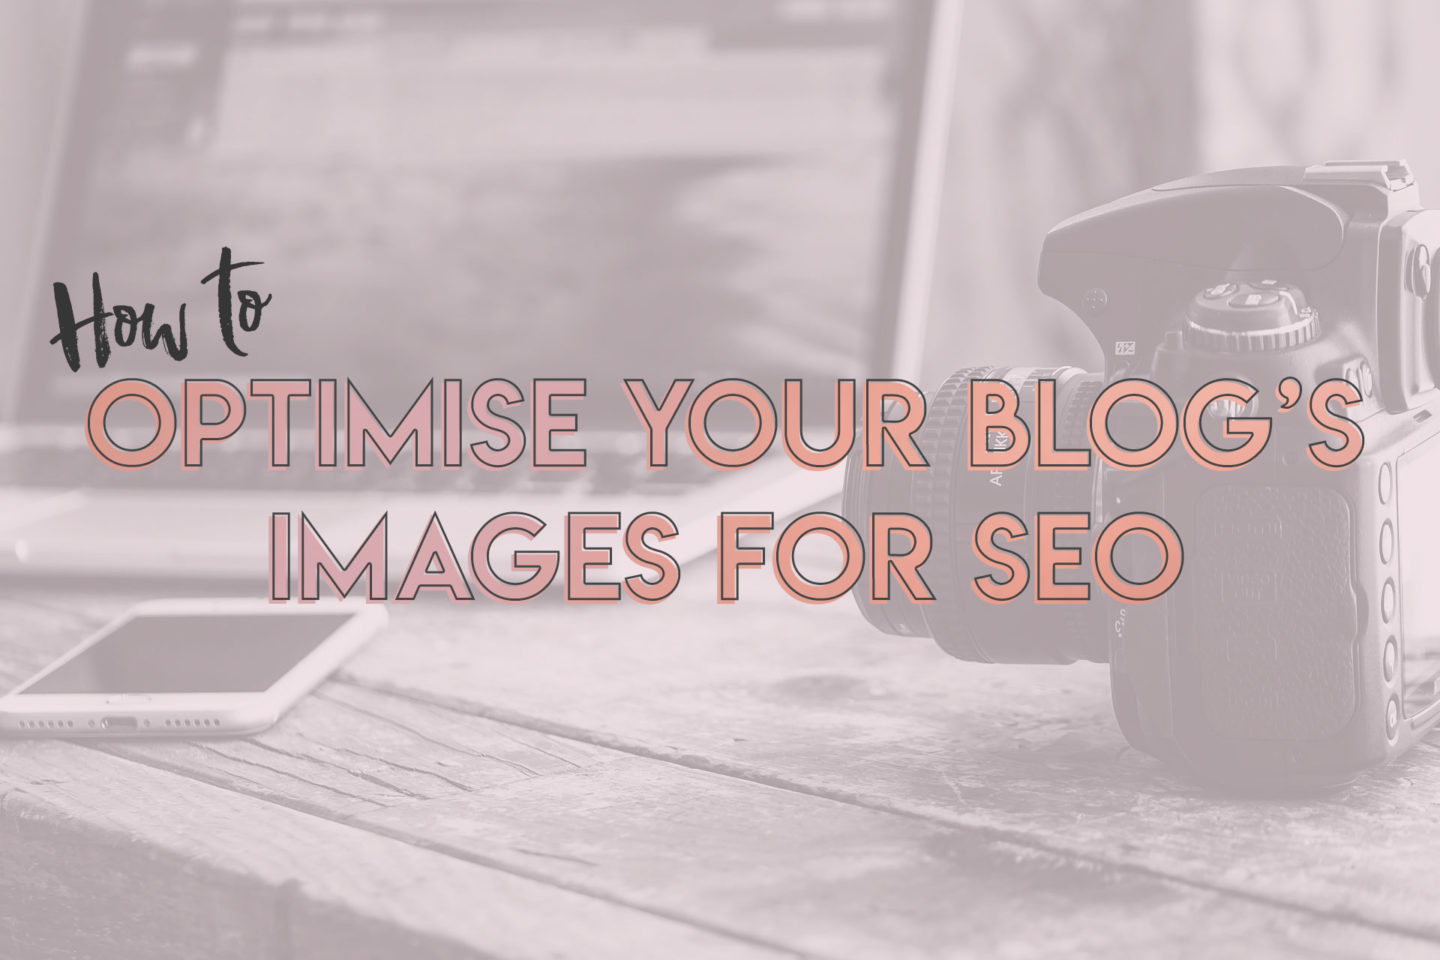 The Best Way To Optimise Your Blog Images For SEO